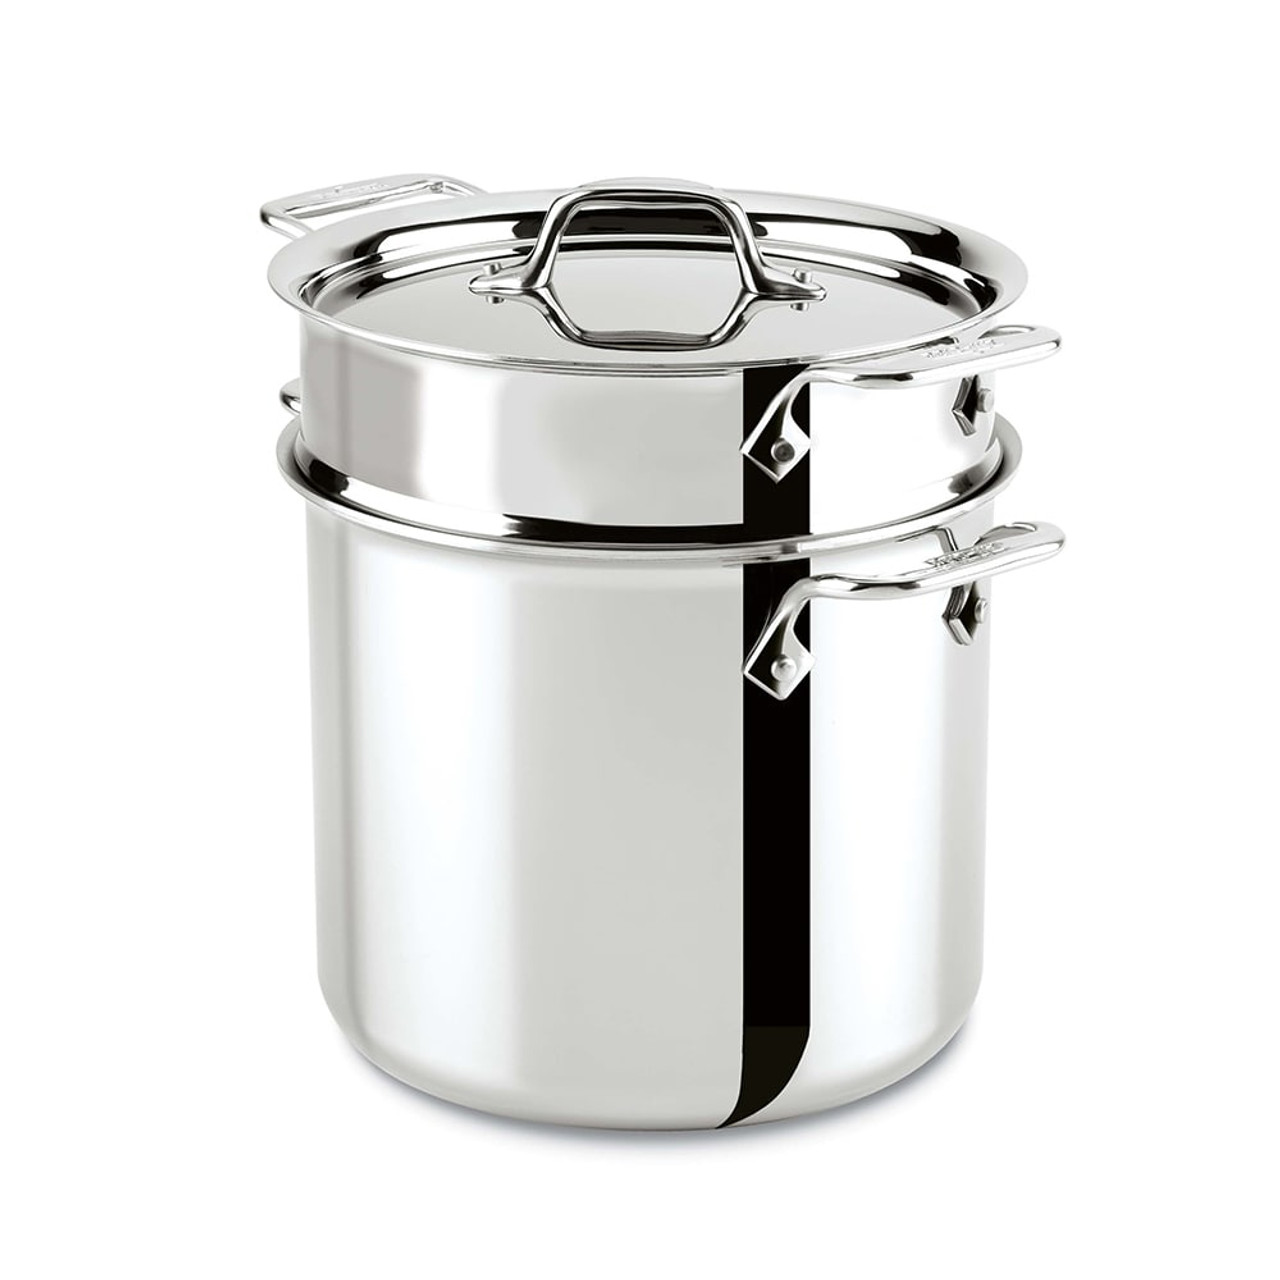 https://cdn11.bigcommerce.com/s-hccytny0od/images/stencil/1280x1280/products/3816/13783/all-clad-d3-stainless-steel-pasta-pentola__86262.1607608132.jpg?c=2?imbypass=on